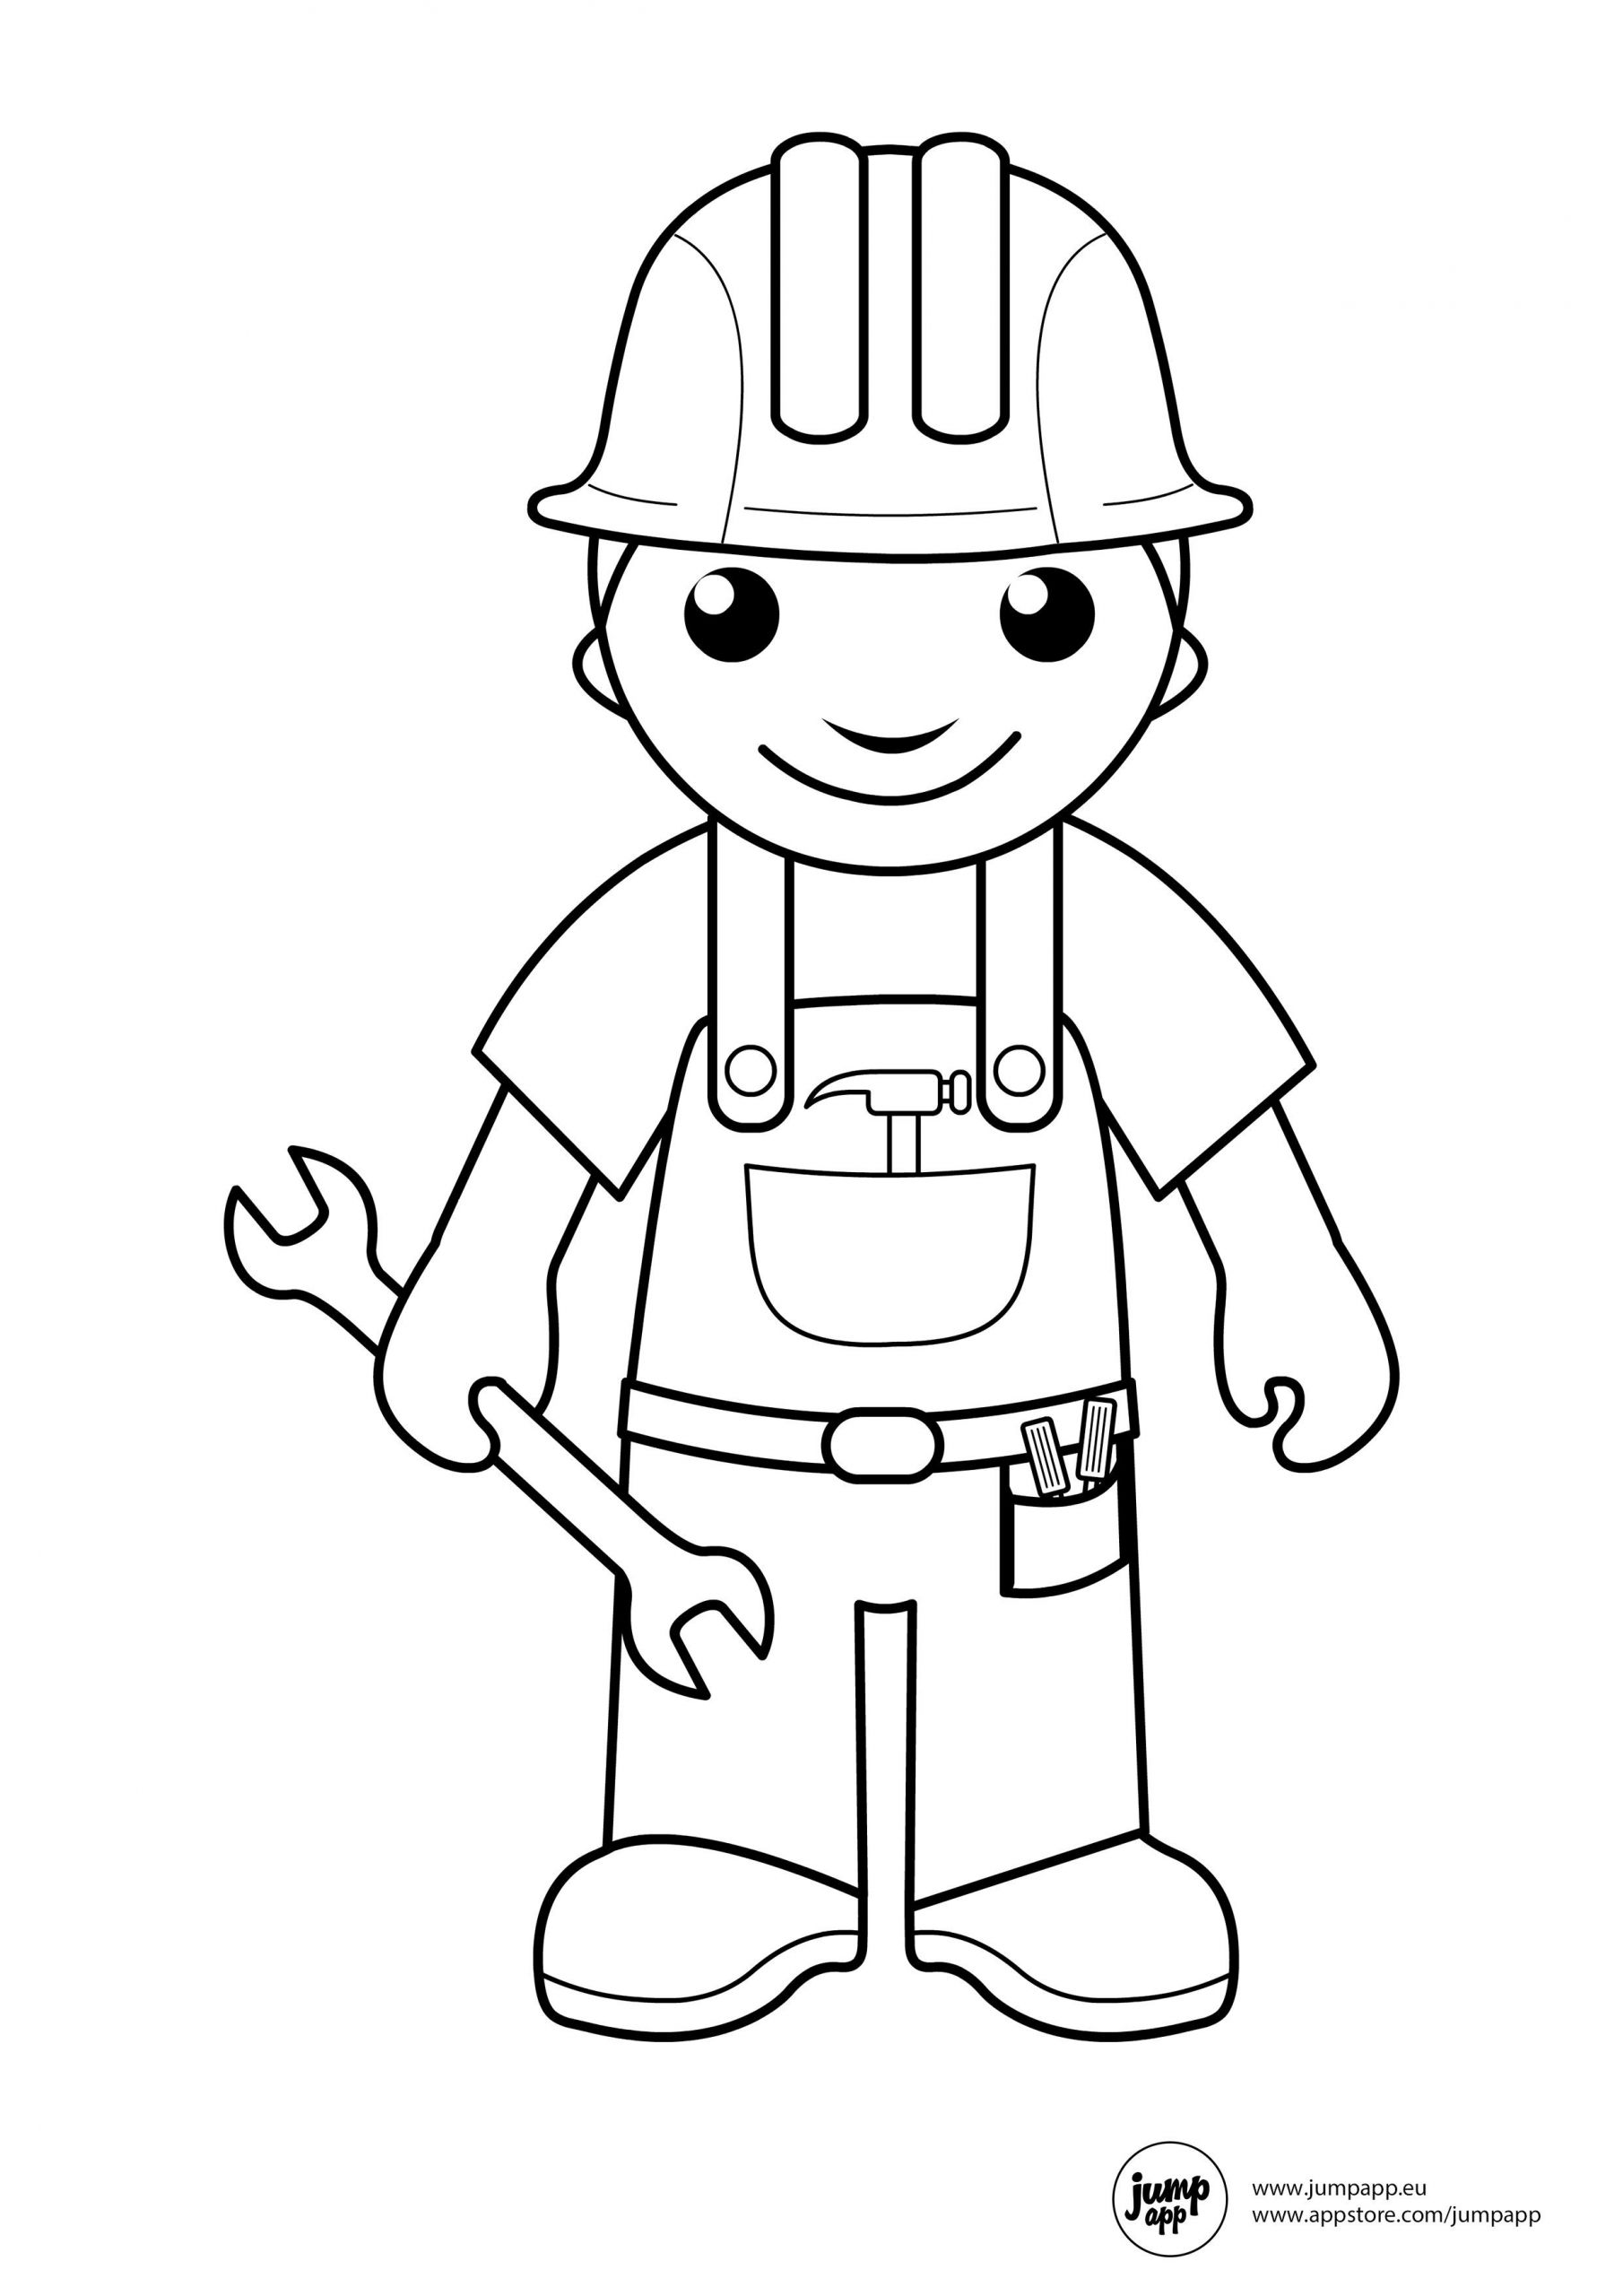 Community Helpers Coloring Pages For Toddlers
 builder